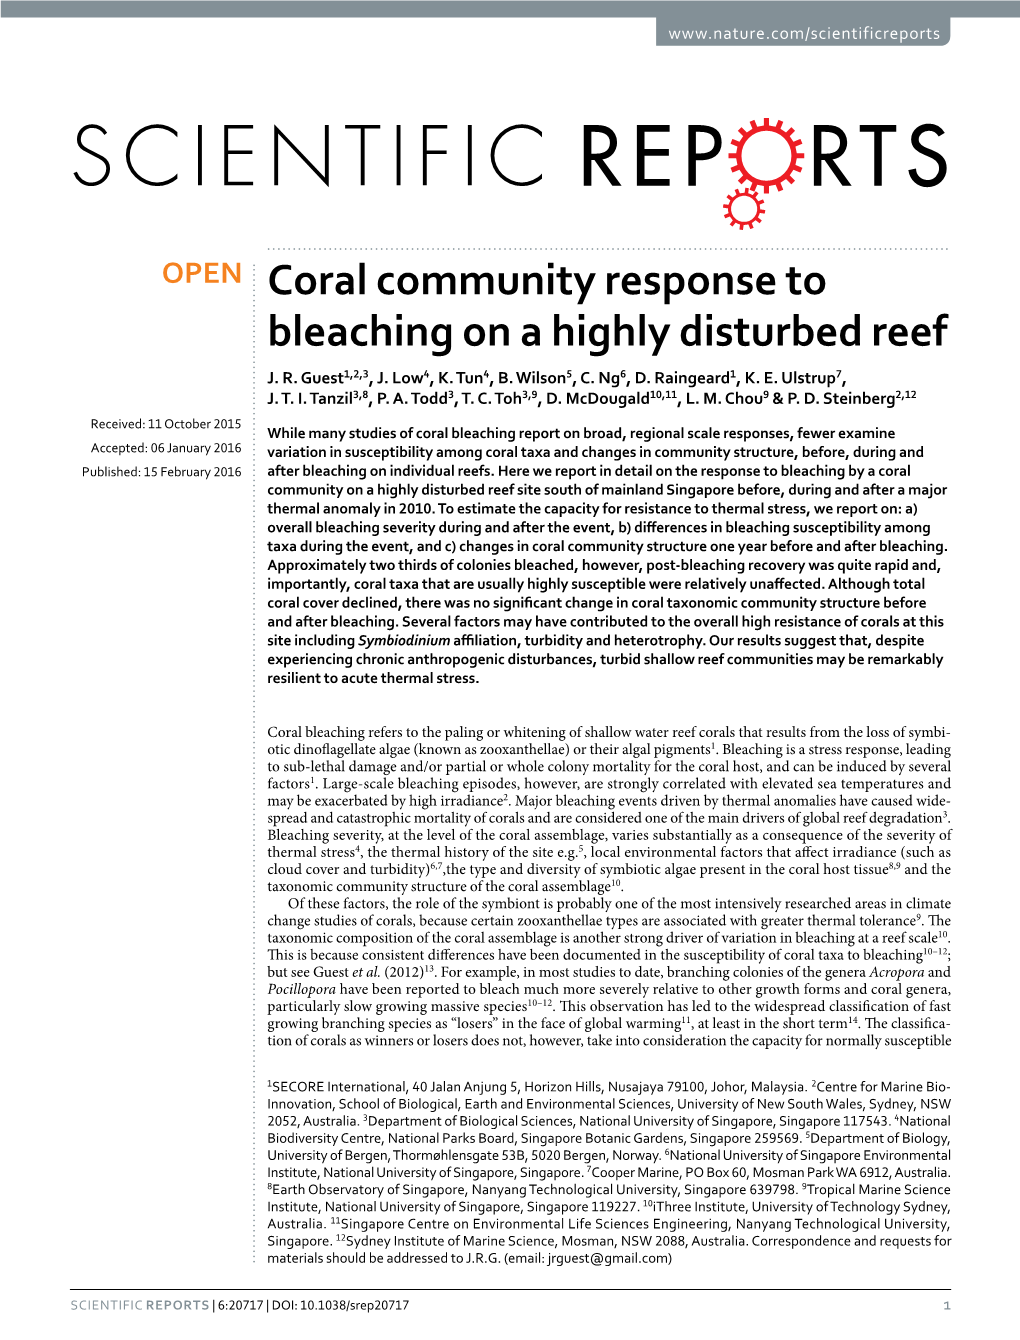 Coral Community Response to Bleaching on a Highly Disturbed Reef J